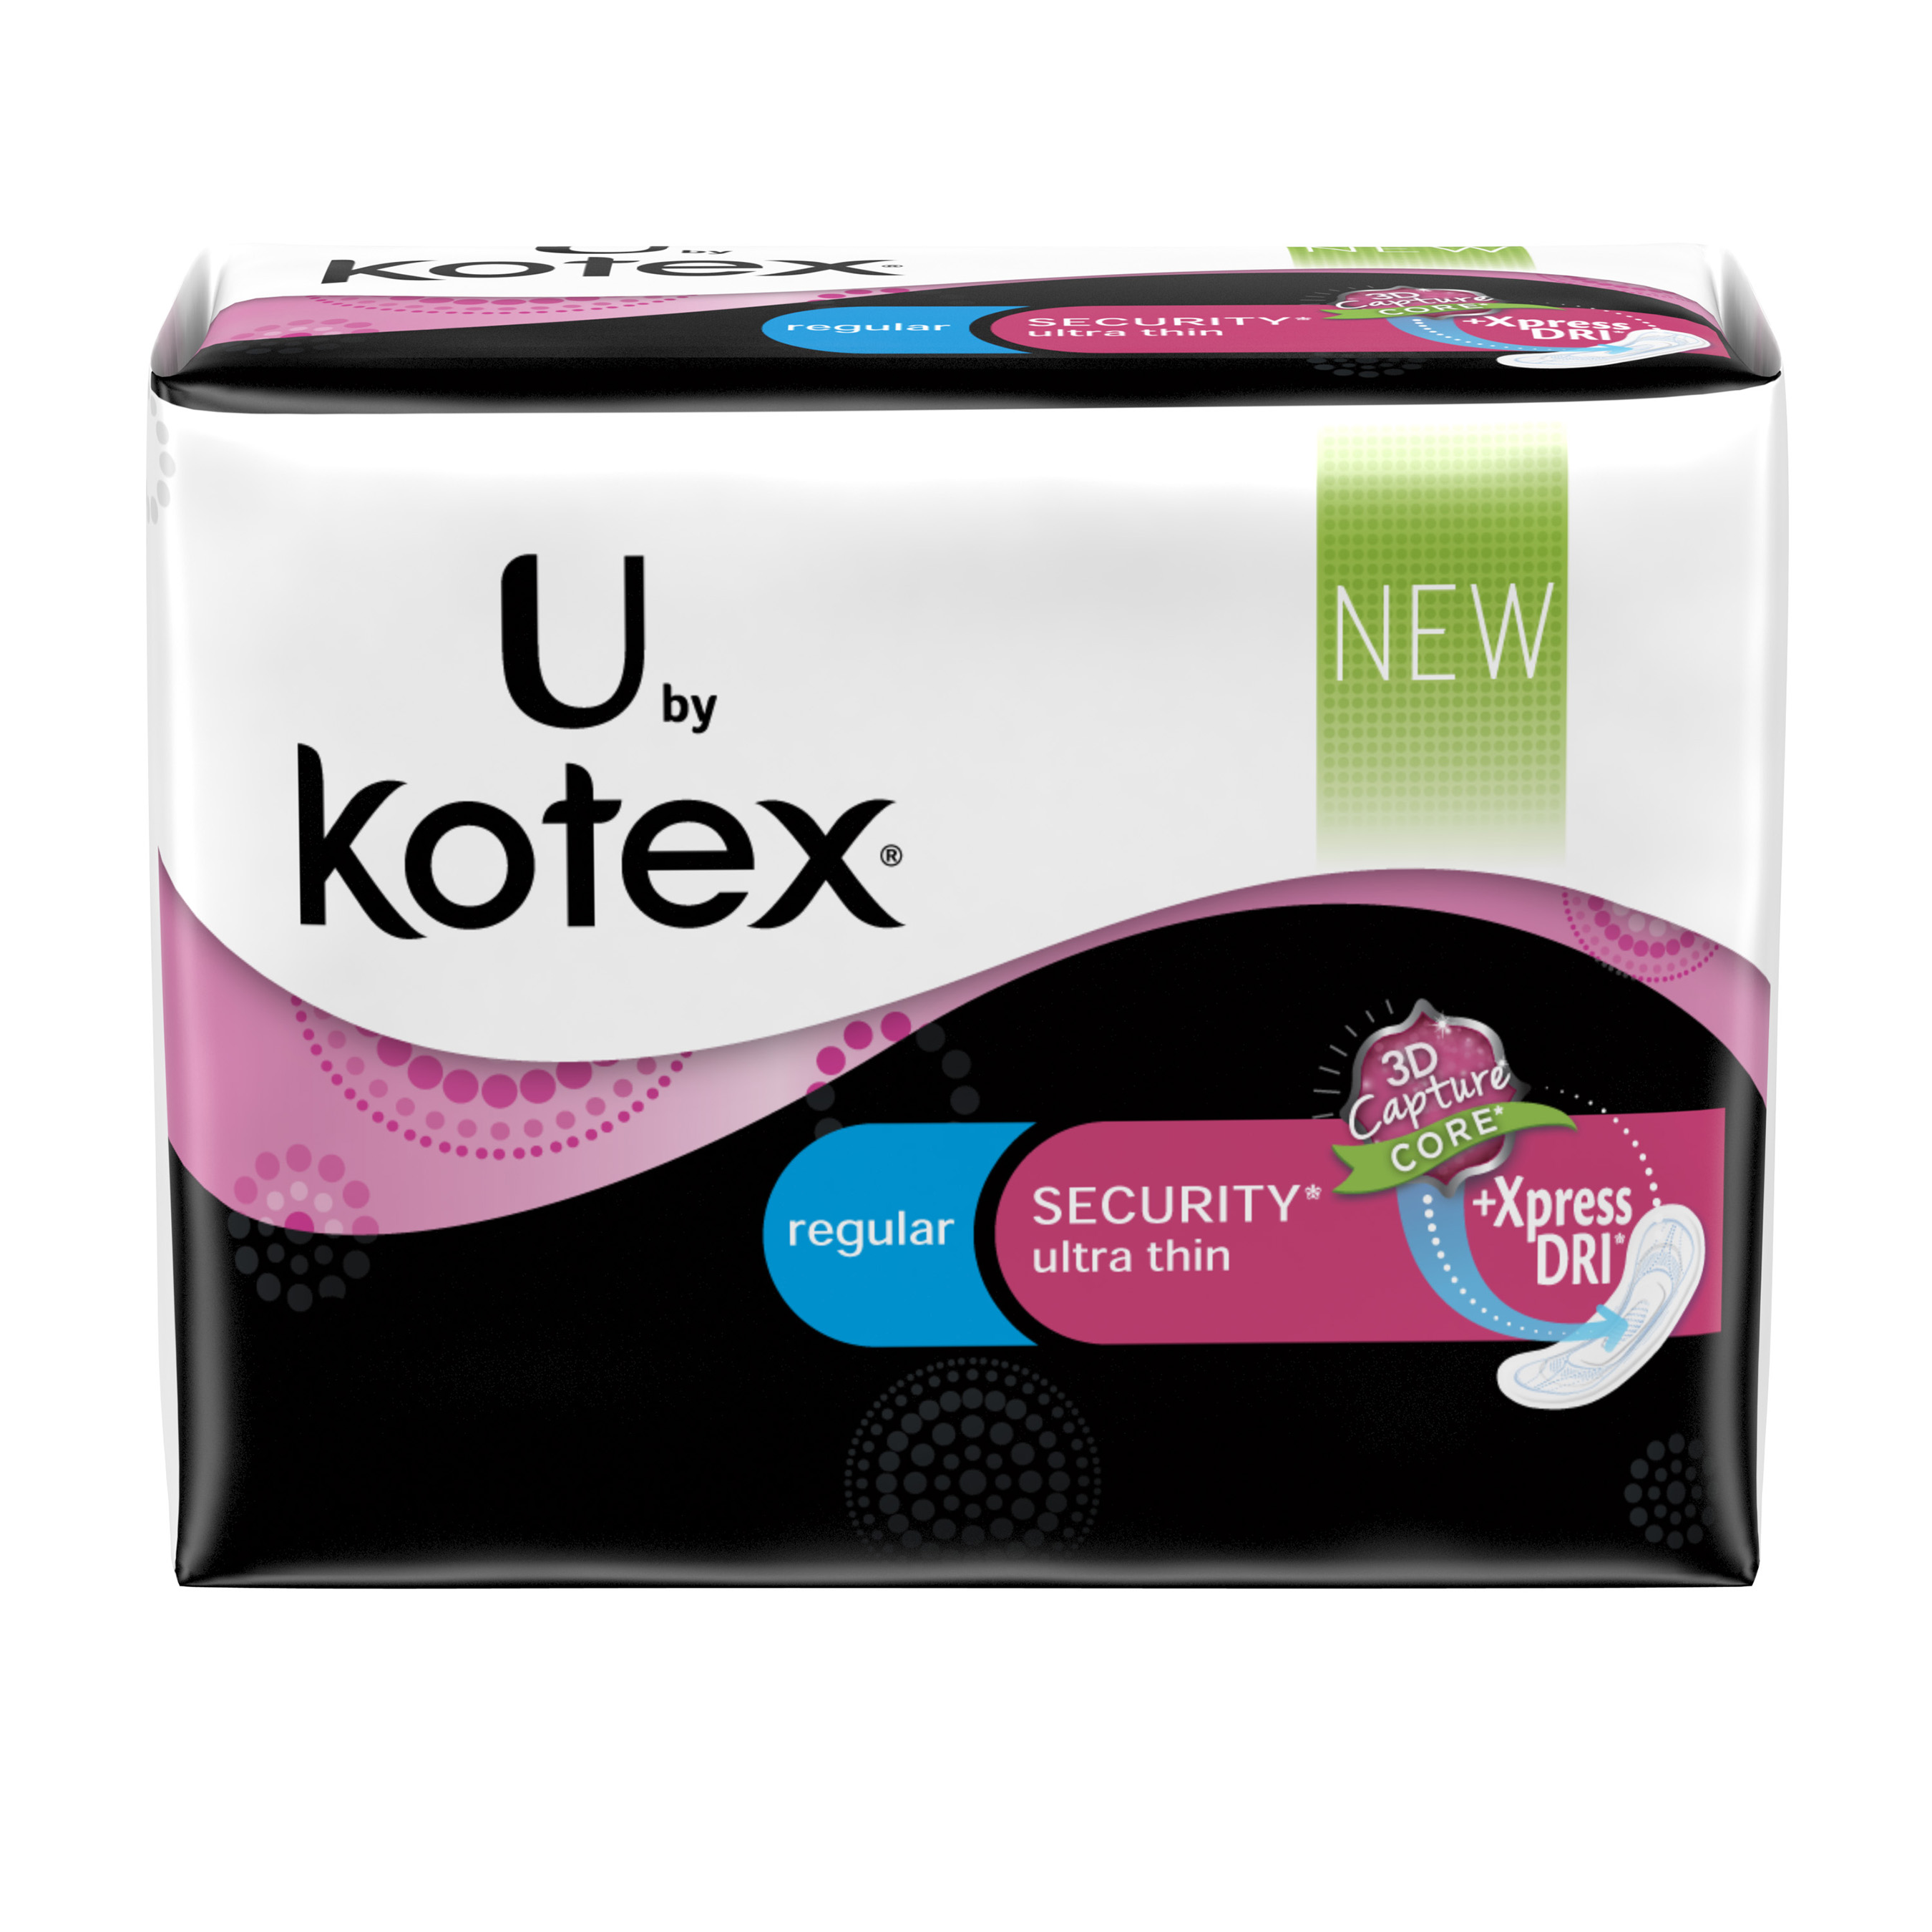 Women everywhere can Save the Undies thanks to the introduction of U by Kotex Security Ultra Thin pads featuring 3D Capture Core and the new Xpress DRI cover.